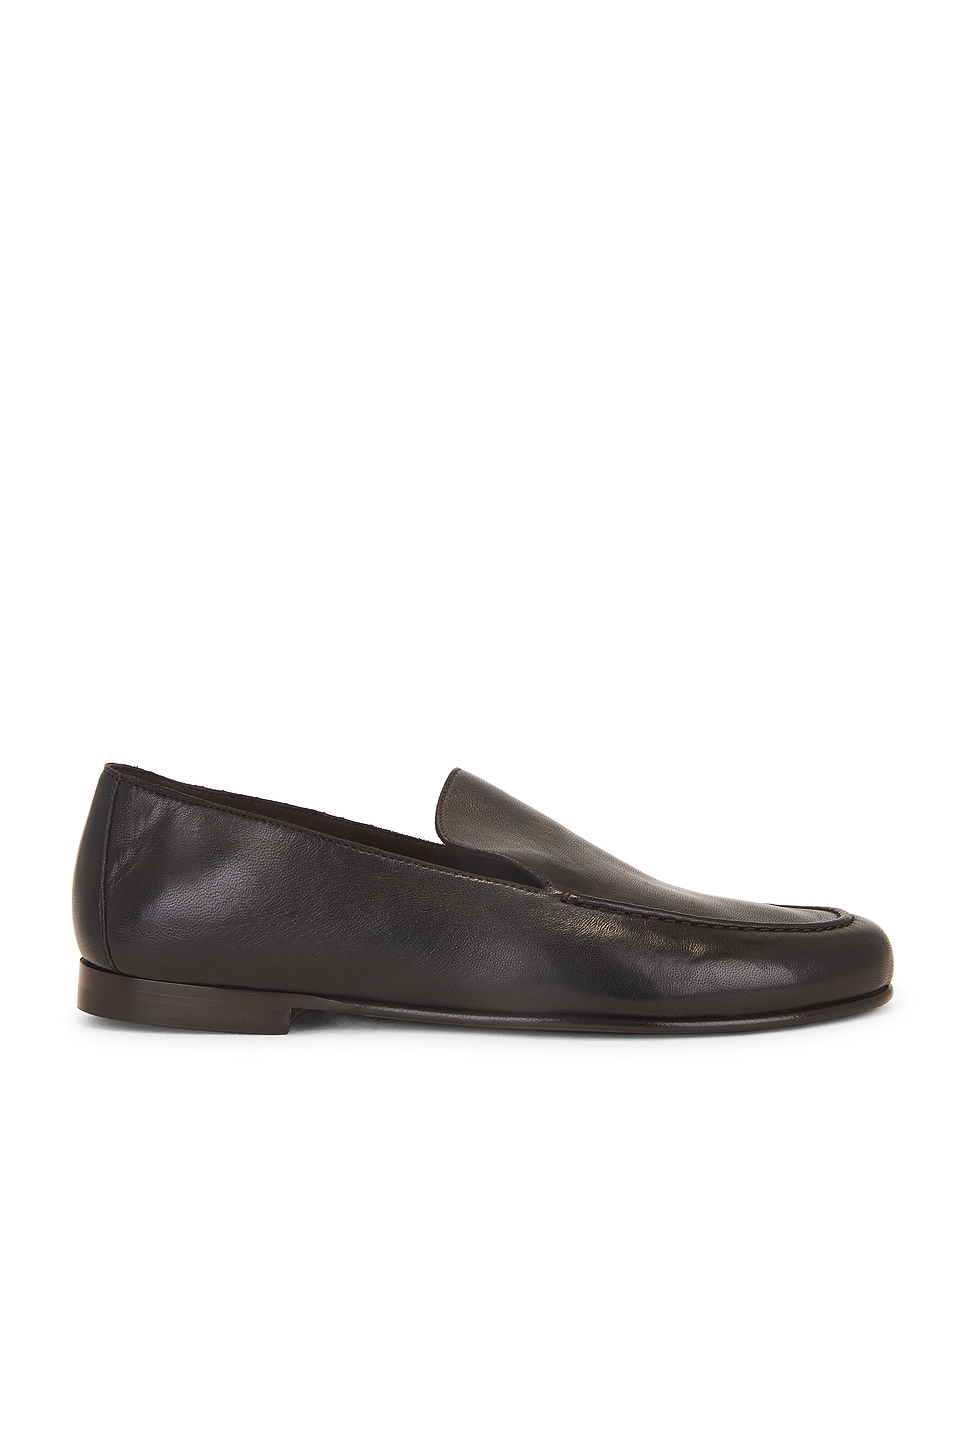 Image 1 of The Row Colette Loafer in CHOCOLATE